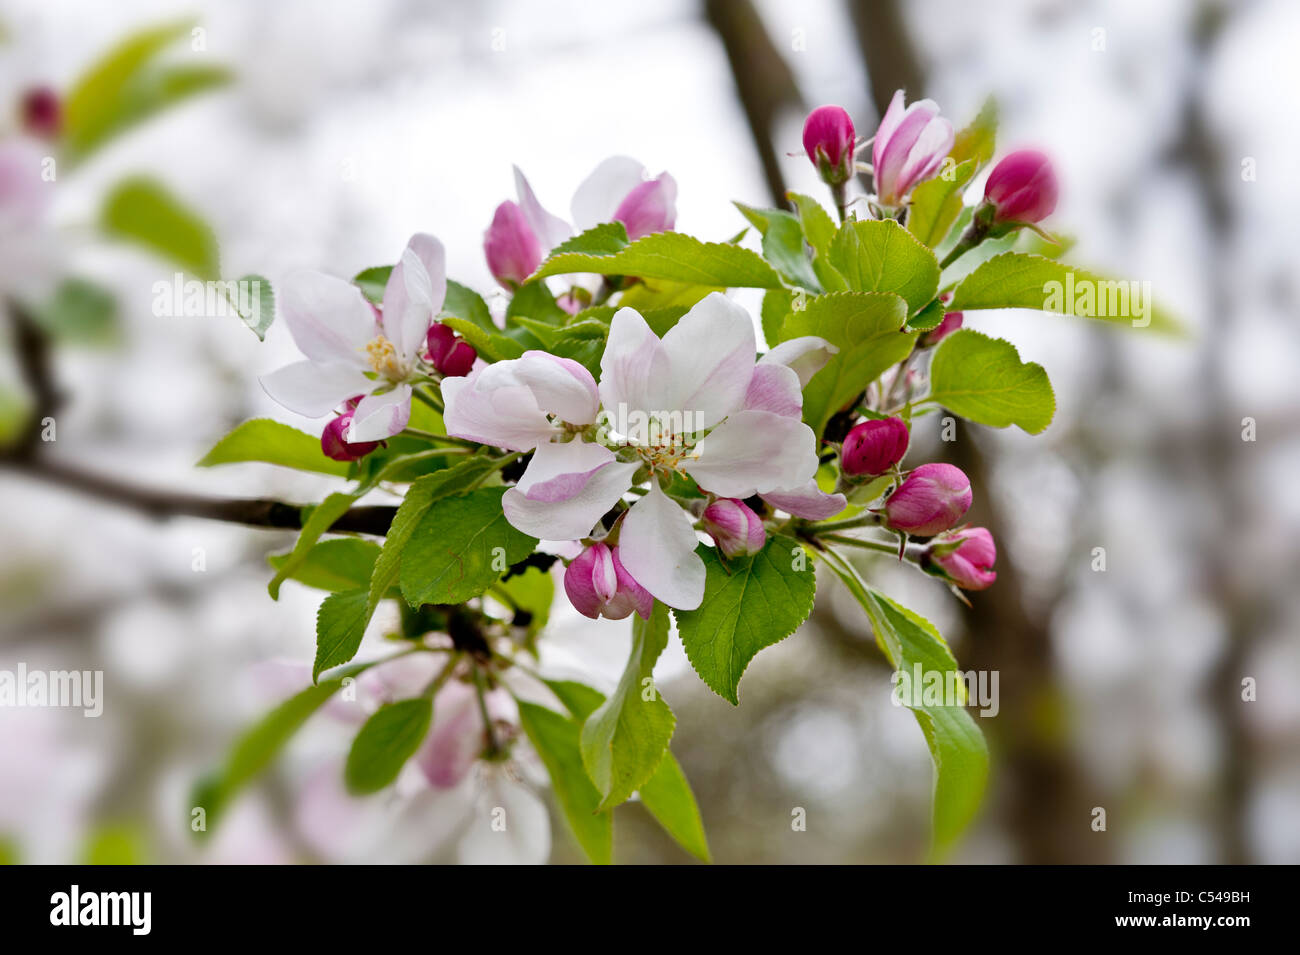 landscape of apple blossom in a cider apple orchard in somerset england Stock Photo